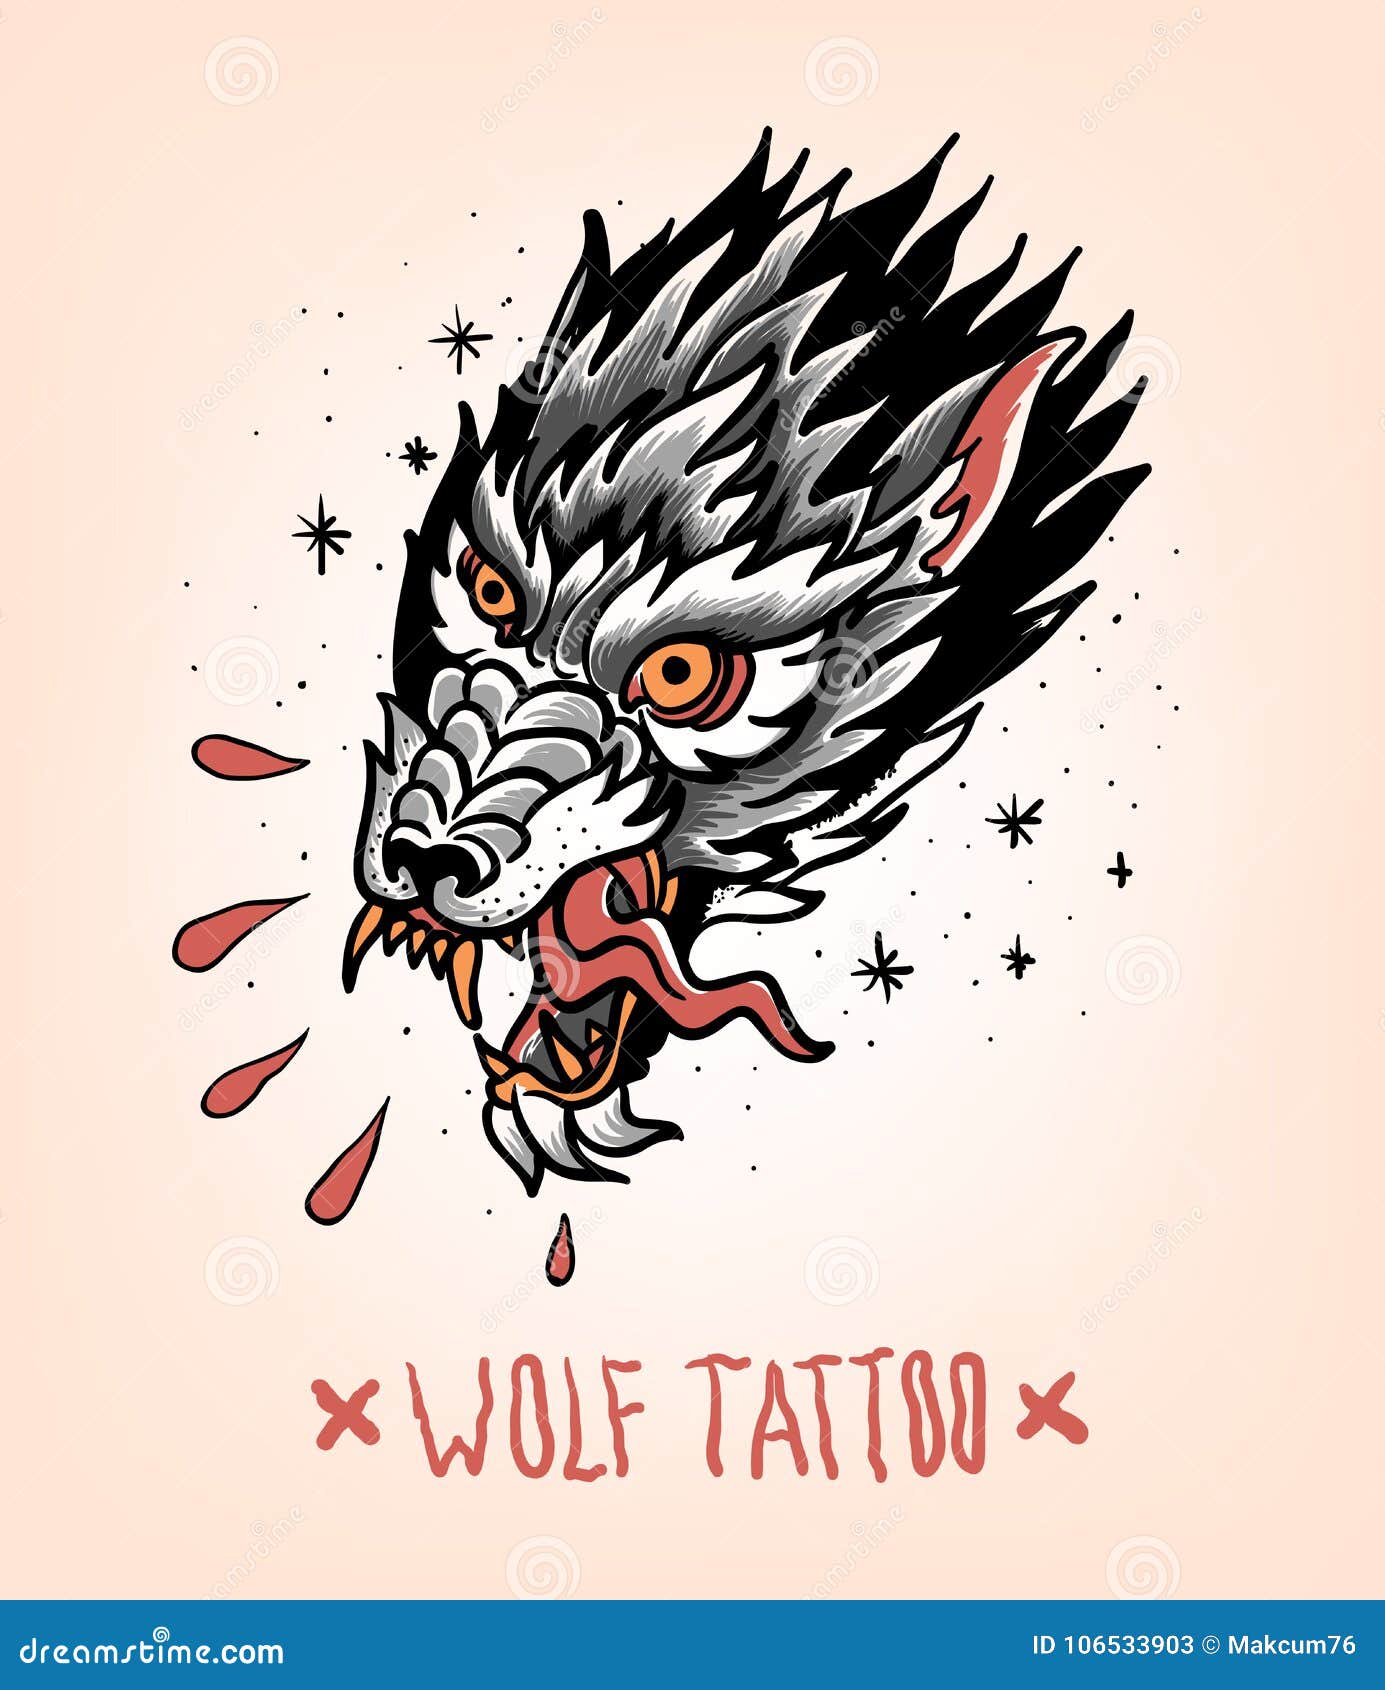 MagnumTattooSupplies on Twitter Fierce wolf tattoo from Danny Taylor done  using magnumtattoosupplies    tradworkers oldworkers  traditionaltattoo traditionalartist tradtattoo traditionaltattoo  tradtats traditionalink tradwork 